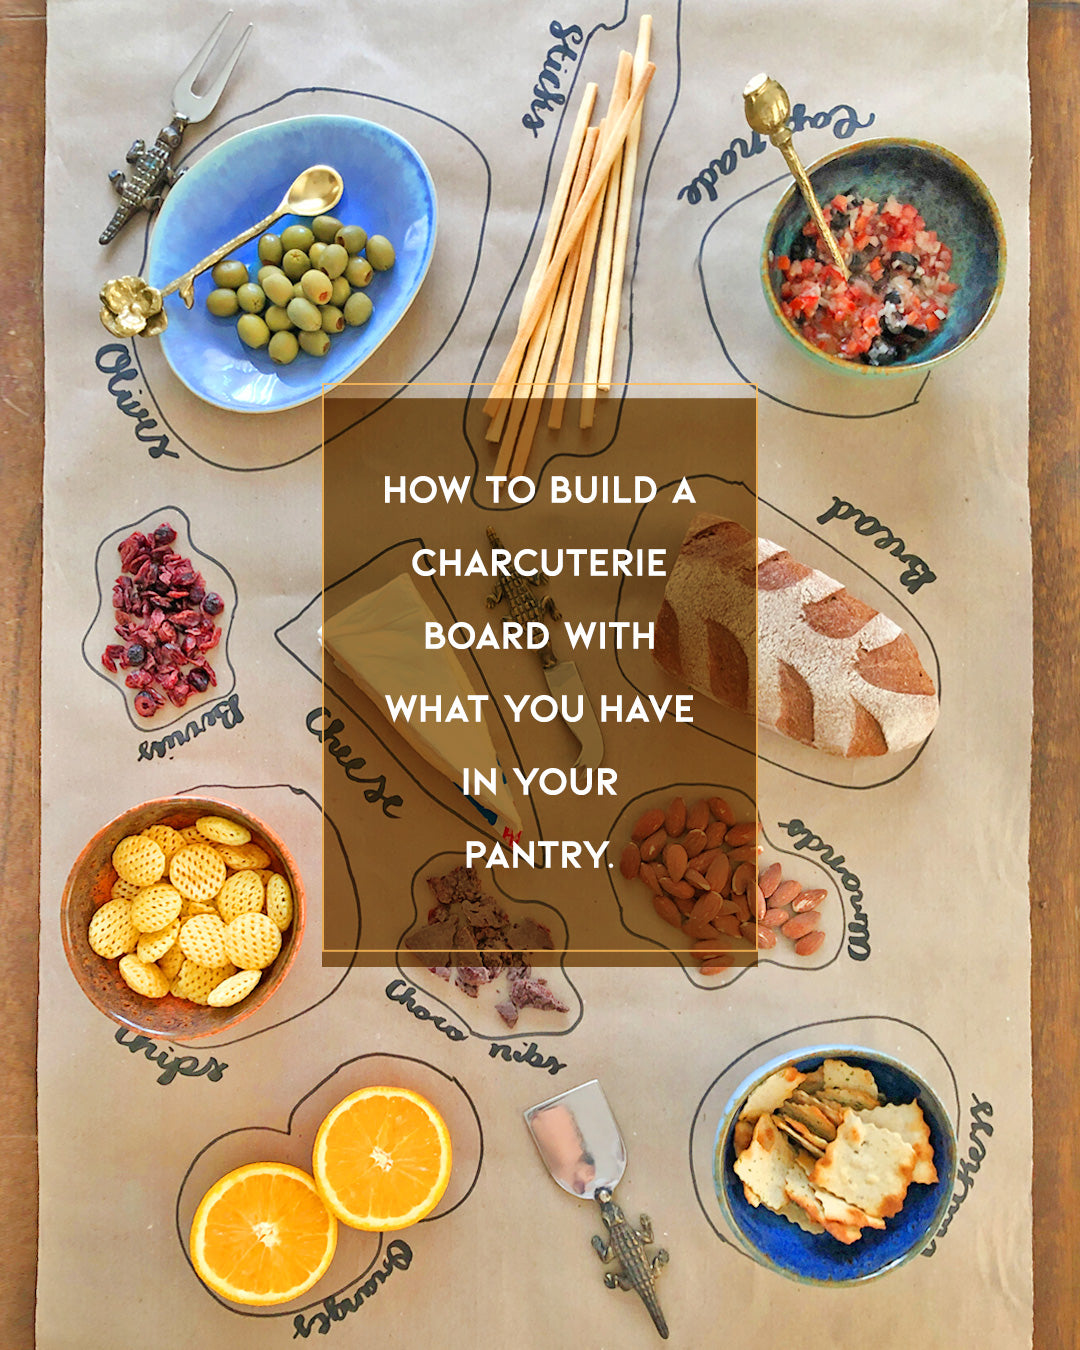 How To Build a Charcuterie Board With What You Have In Your Pantry